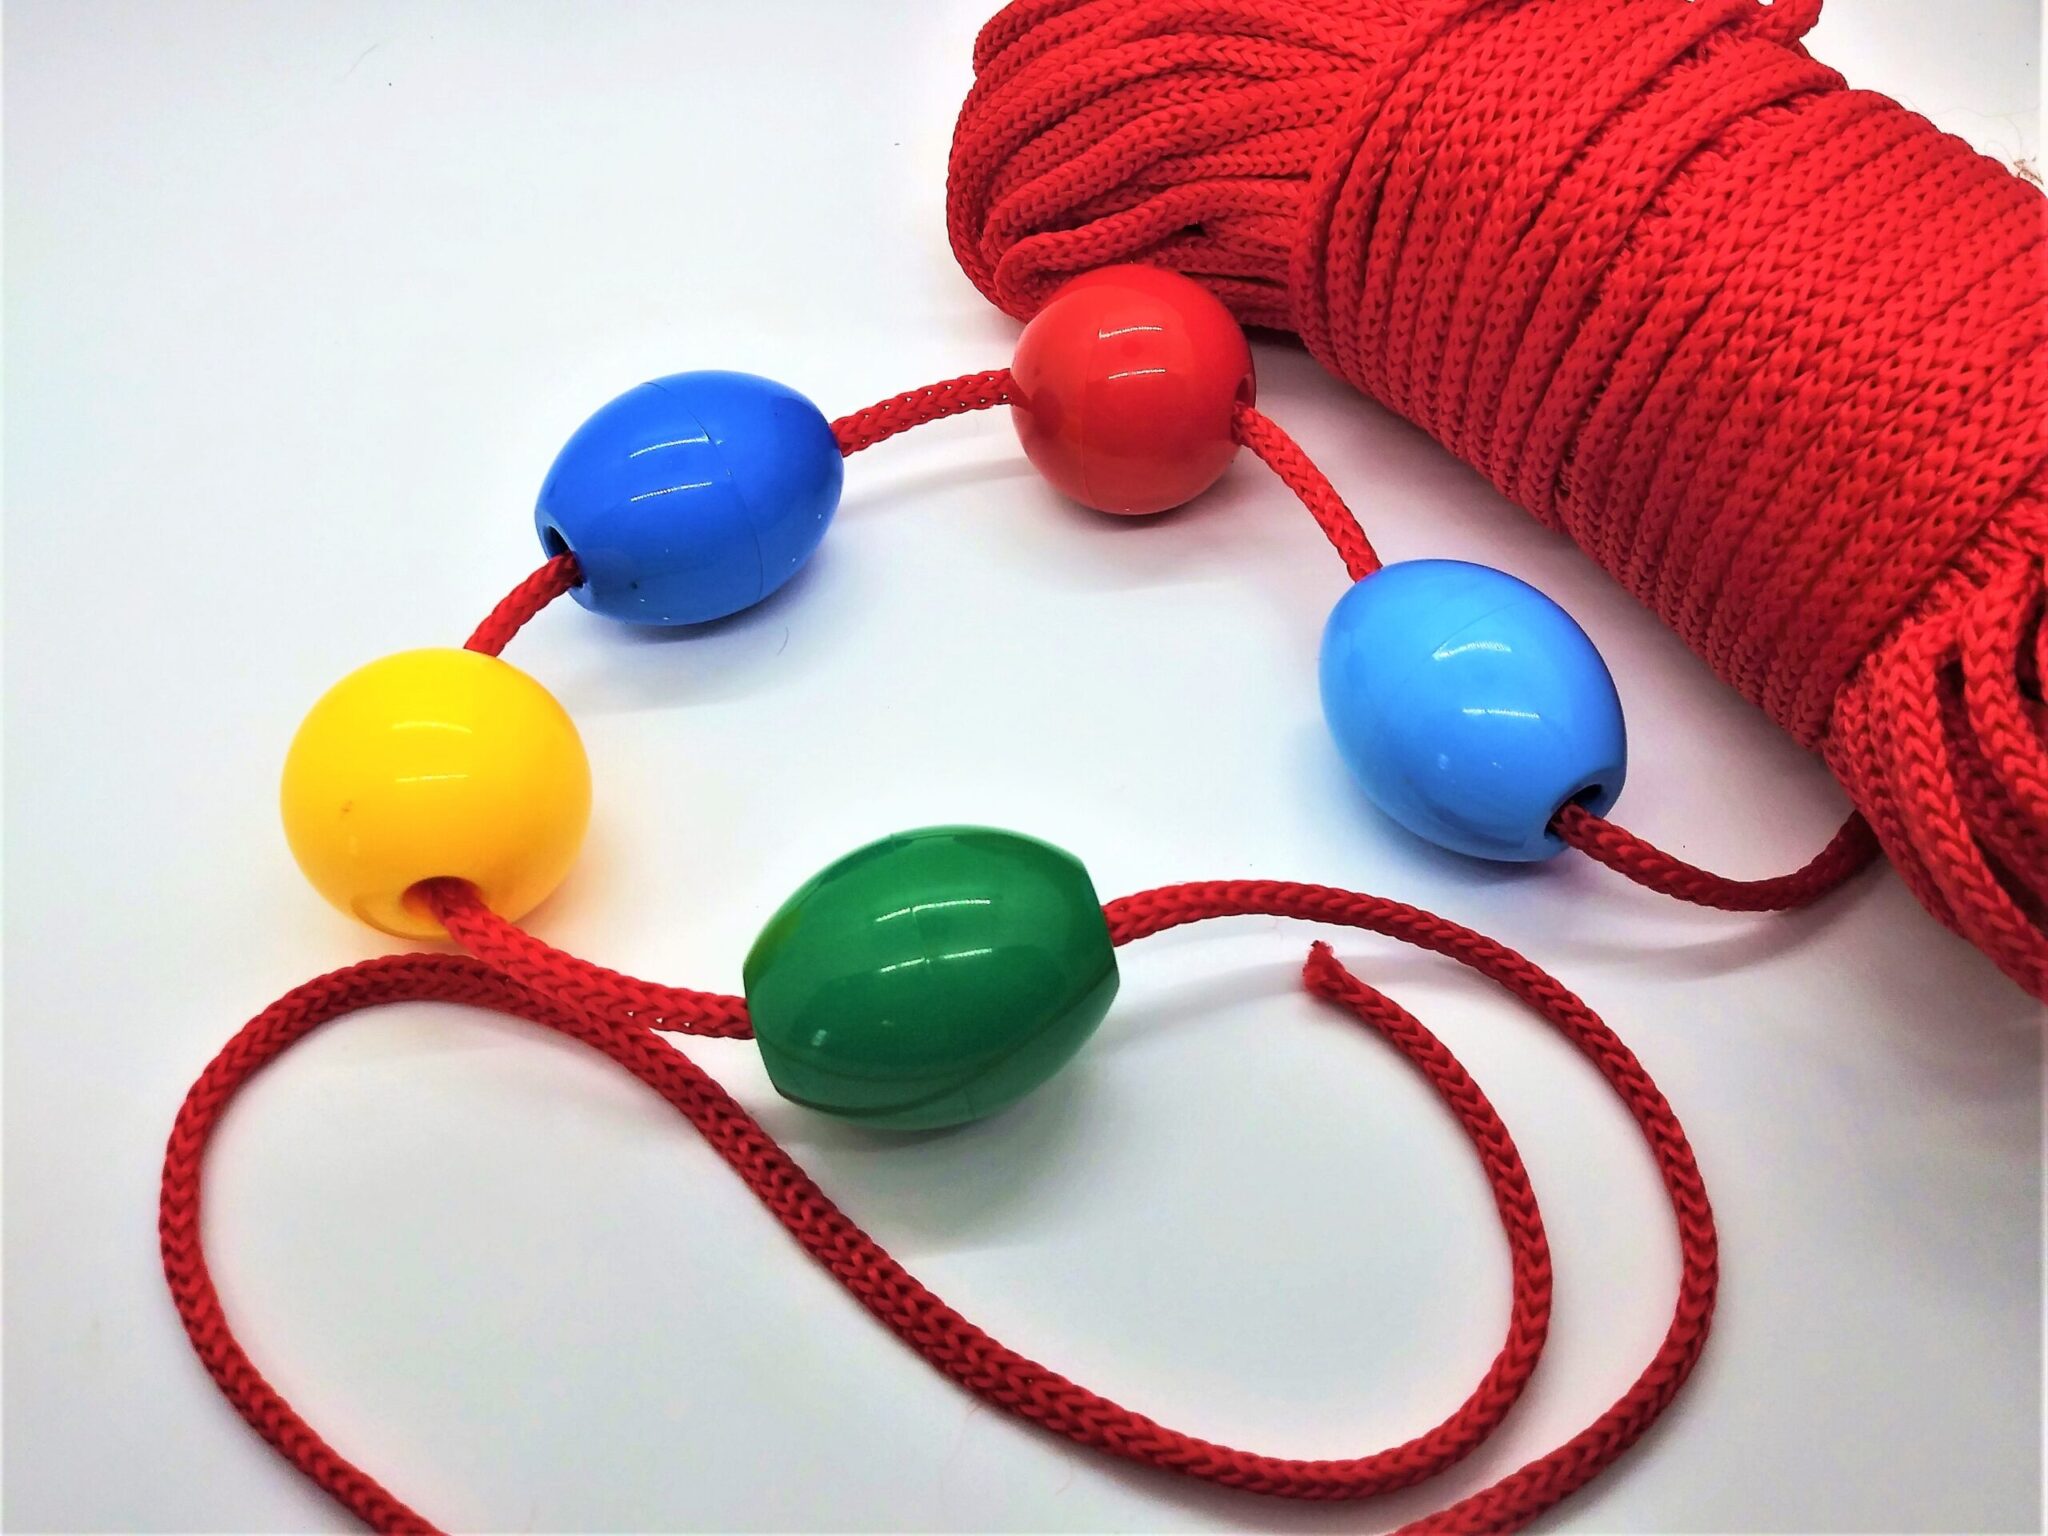 Homemade anal beads. Photo of 5 plastic beads strong on red rope to measure the proper length before cutting the rope.